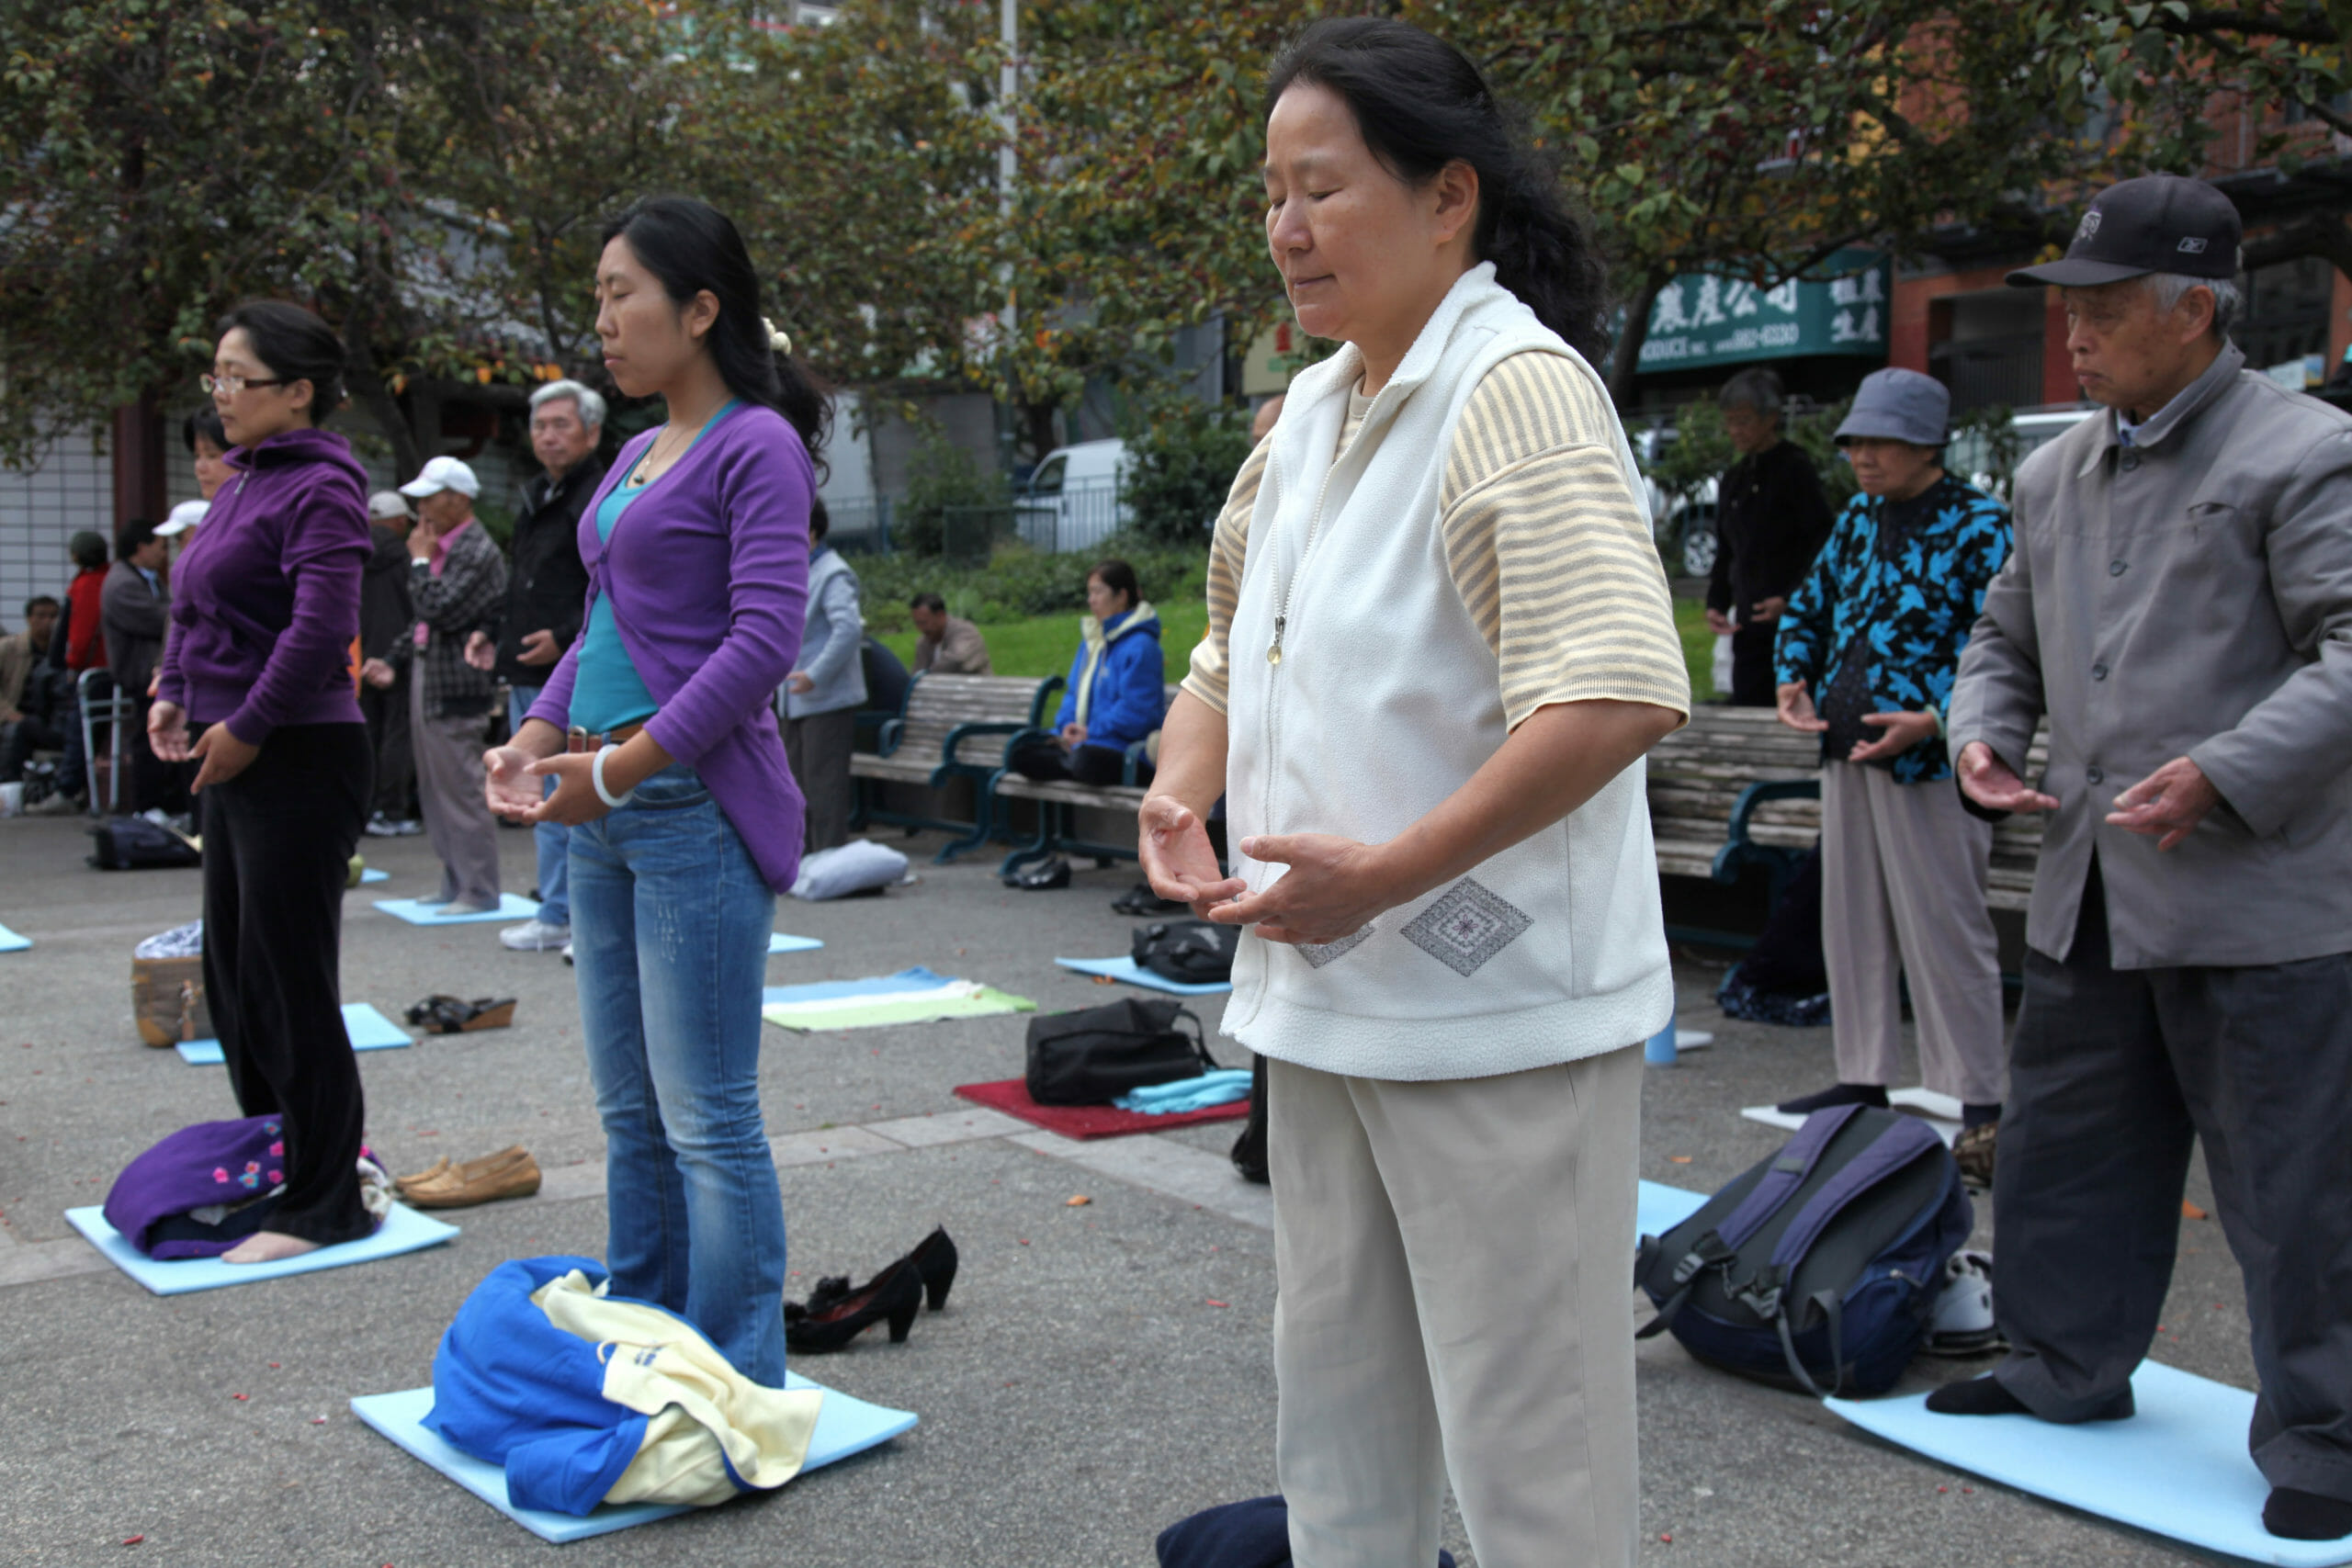 Read more about the article Kinas parlament vil knuse Falun Gong